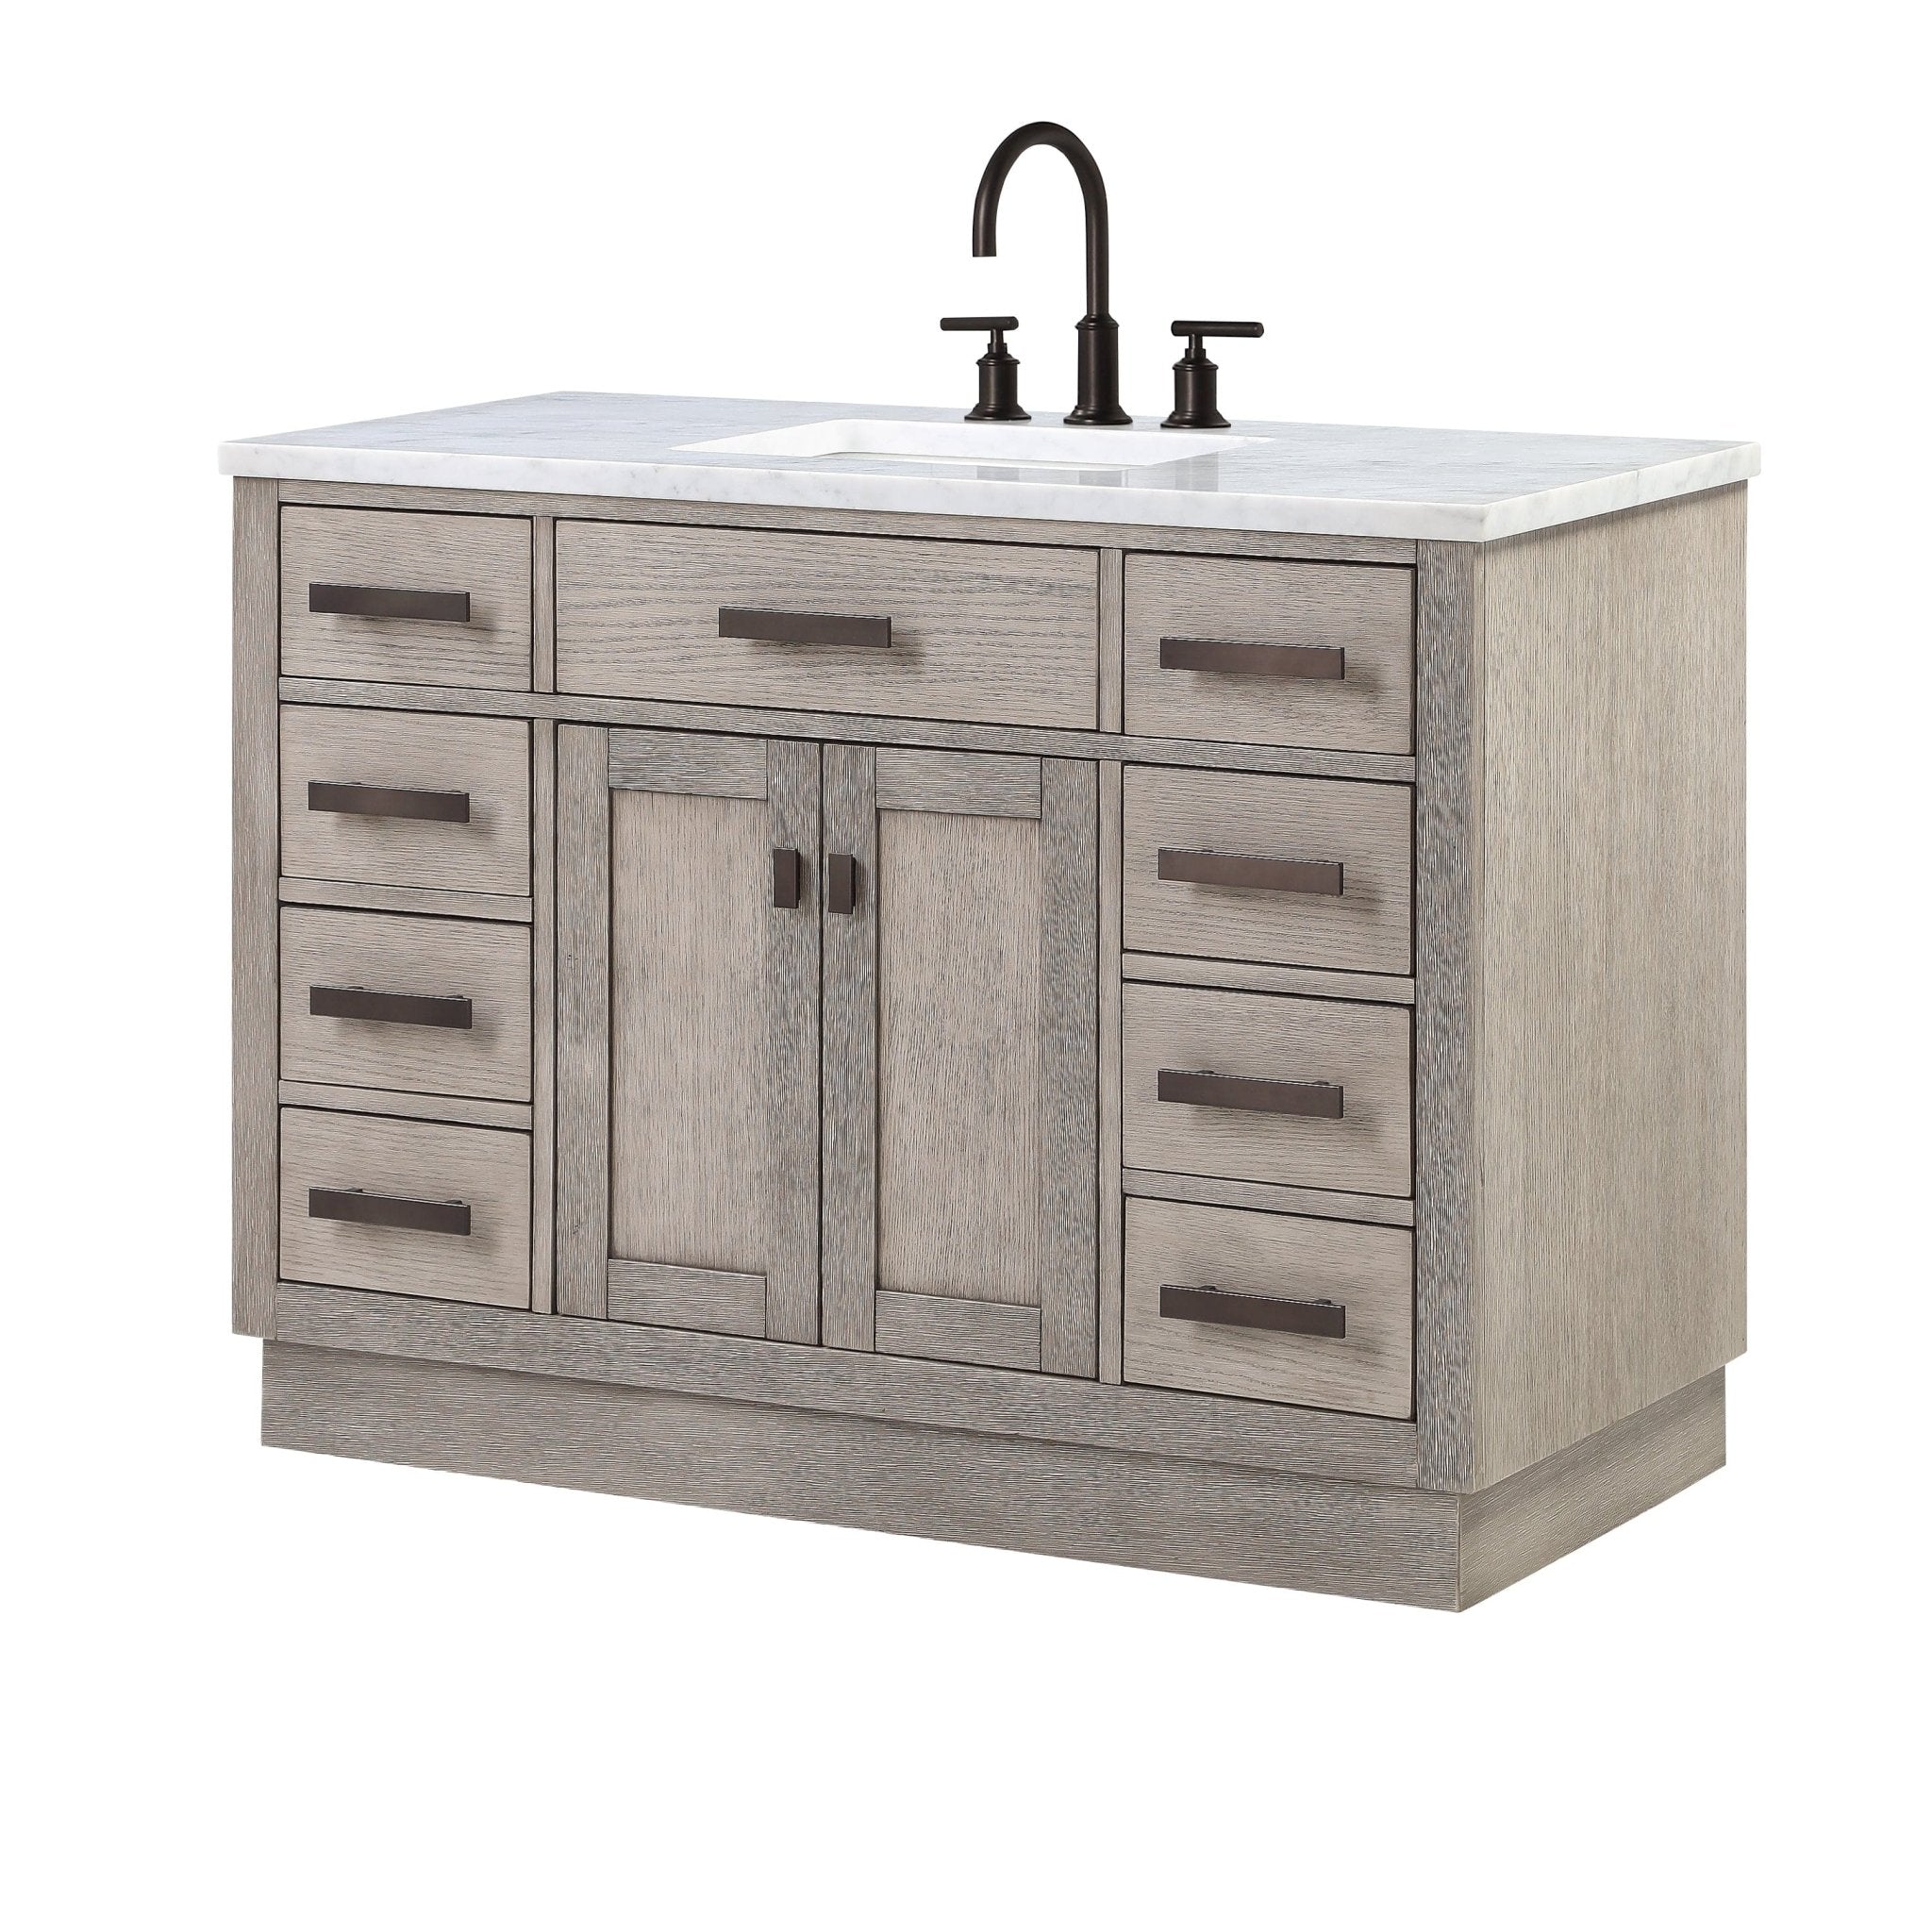 Chestnut 48 In. Single Sink Carrara White Marble Countertop Vanity In Grey Oak with Grooseneck Faucet and Mirror - Molaix732030764750CH48CW03GK-R21BL1403